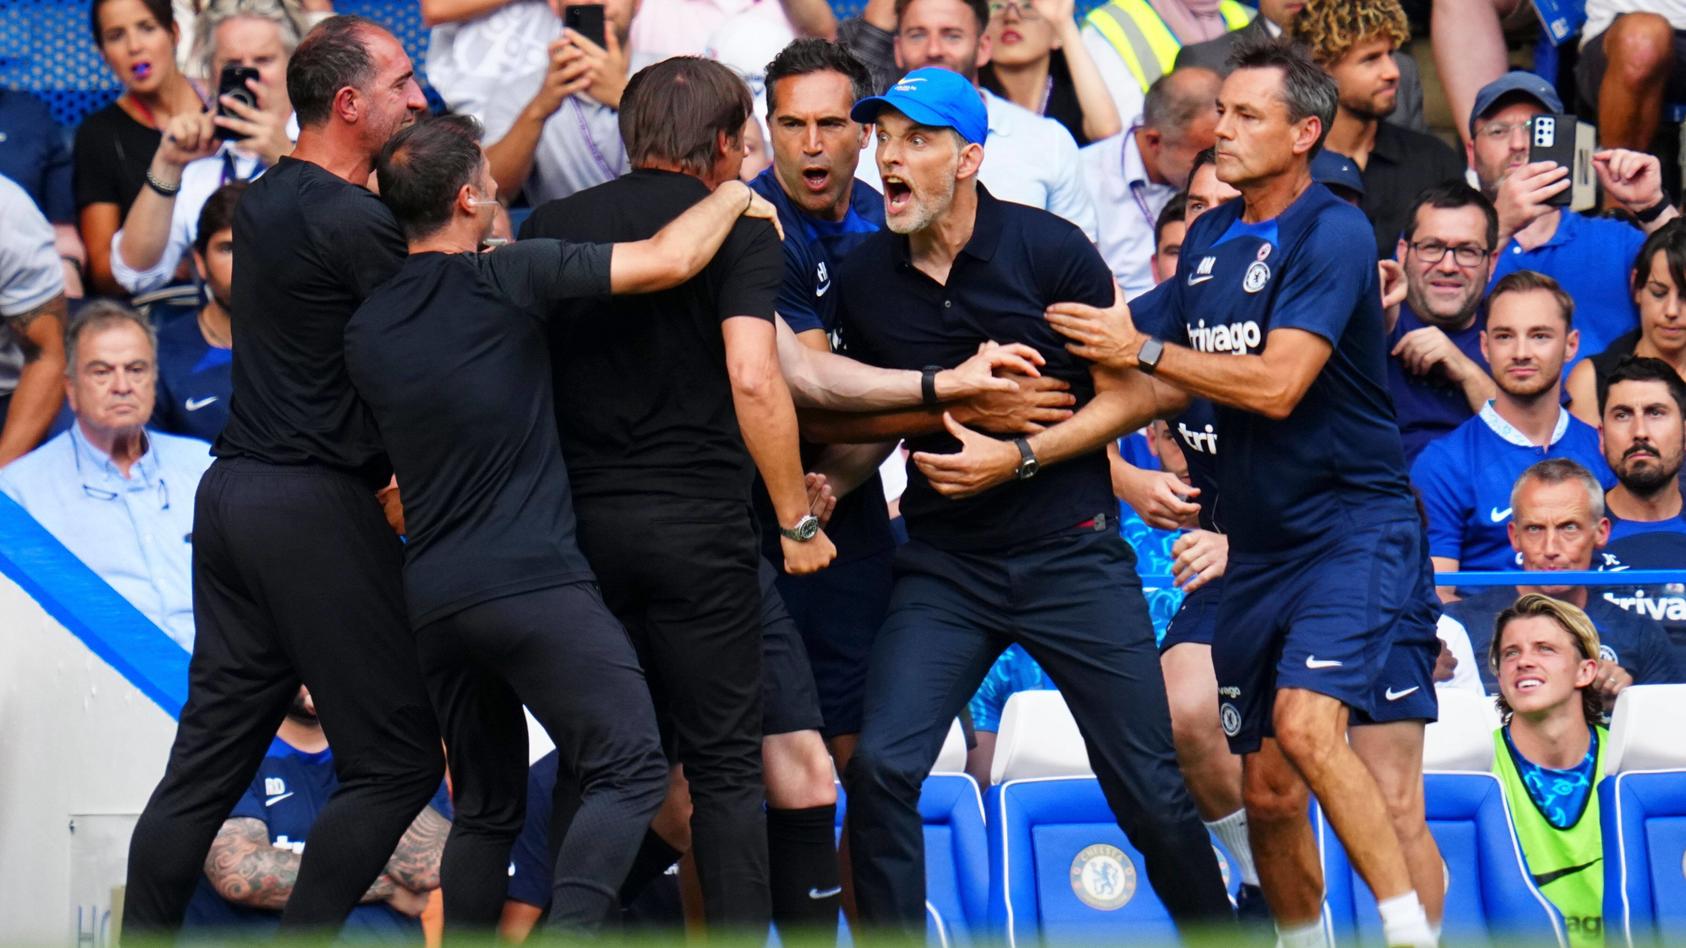 Mandatory Credit: Photo by Javier Garcia/Shutterstock 13079055ae Tottenham Hotspur Manager Antonio Conte and Chelsea manager Thomas Tuchel square up after Conte celebrated their first goal 1-1 Chelsea v Tottenham Hotspur, Premier League, Football, St